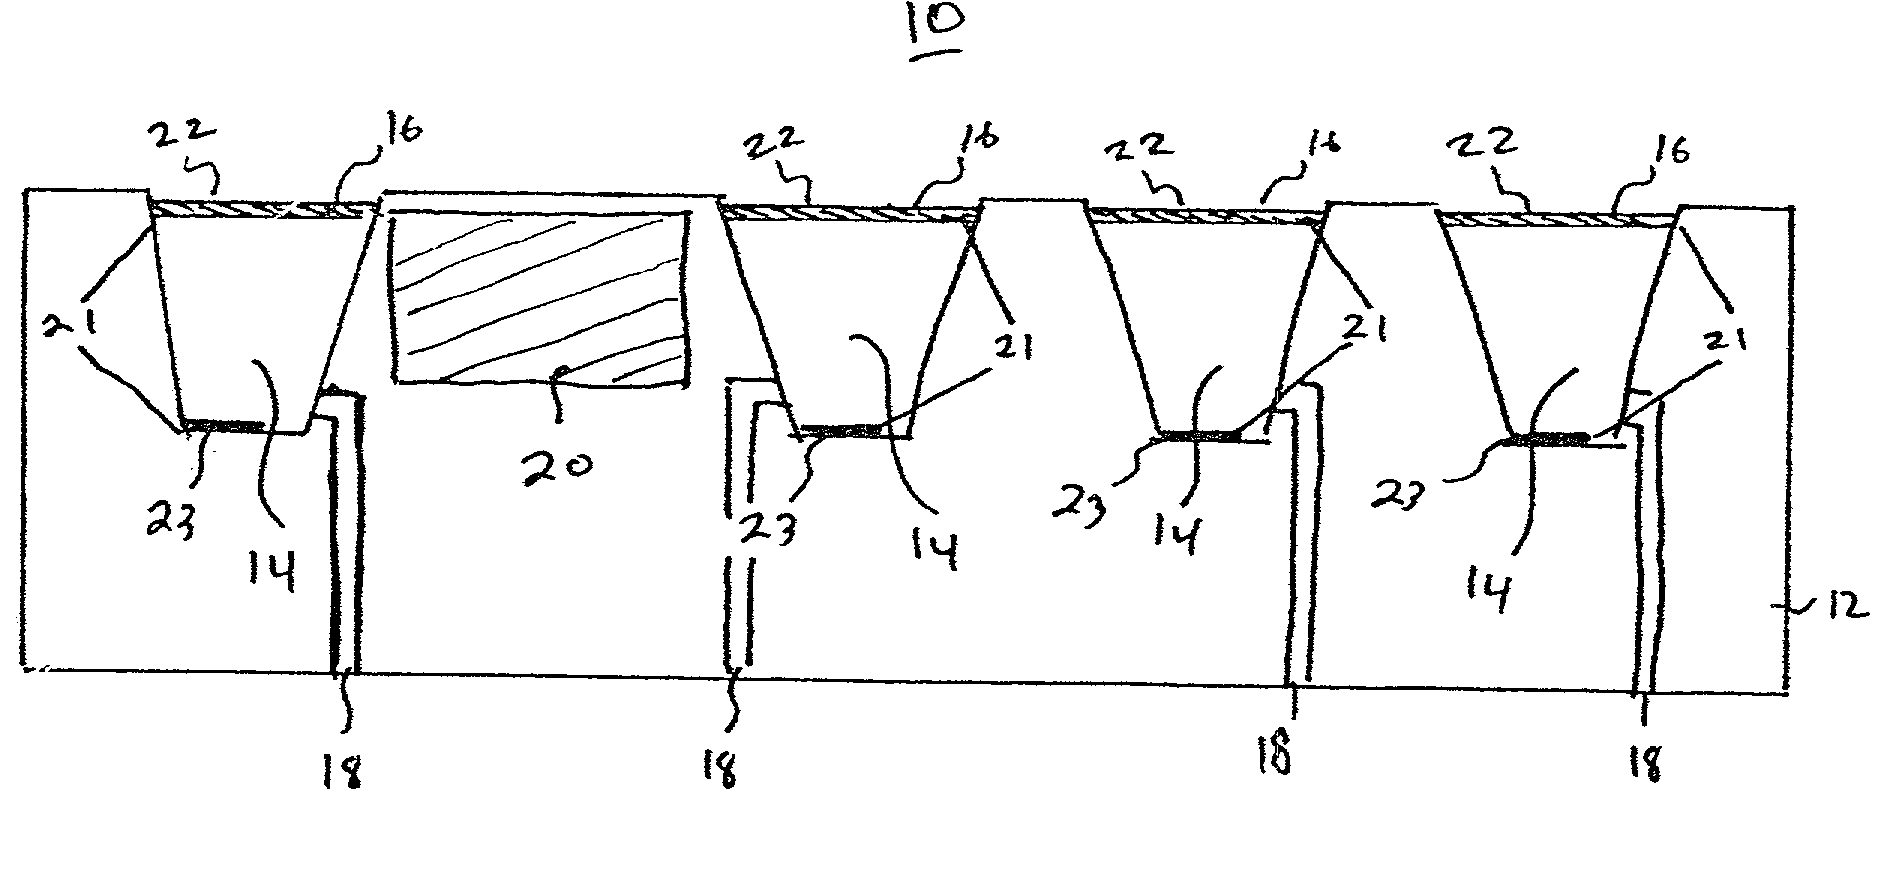 Devices for intrabody delivery of molecules and systems and methods utilizing same